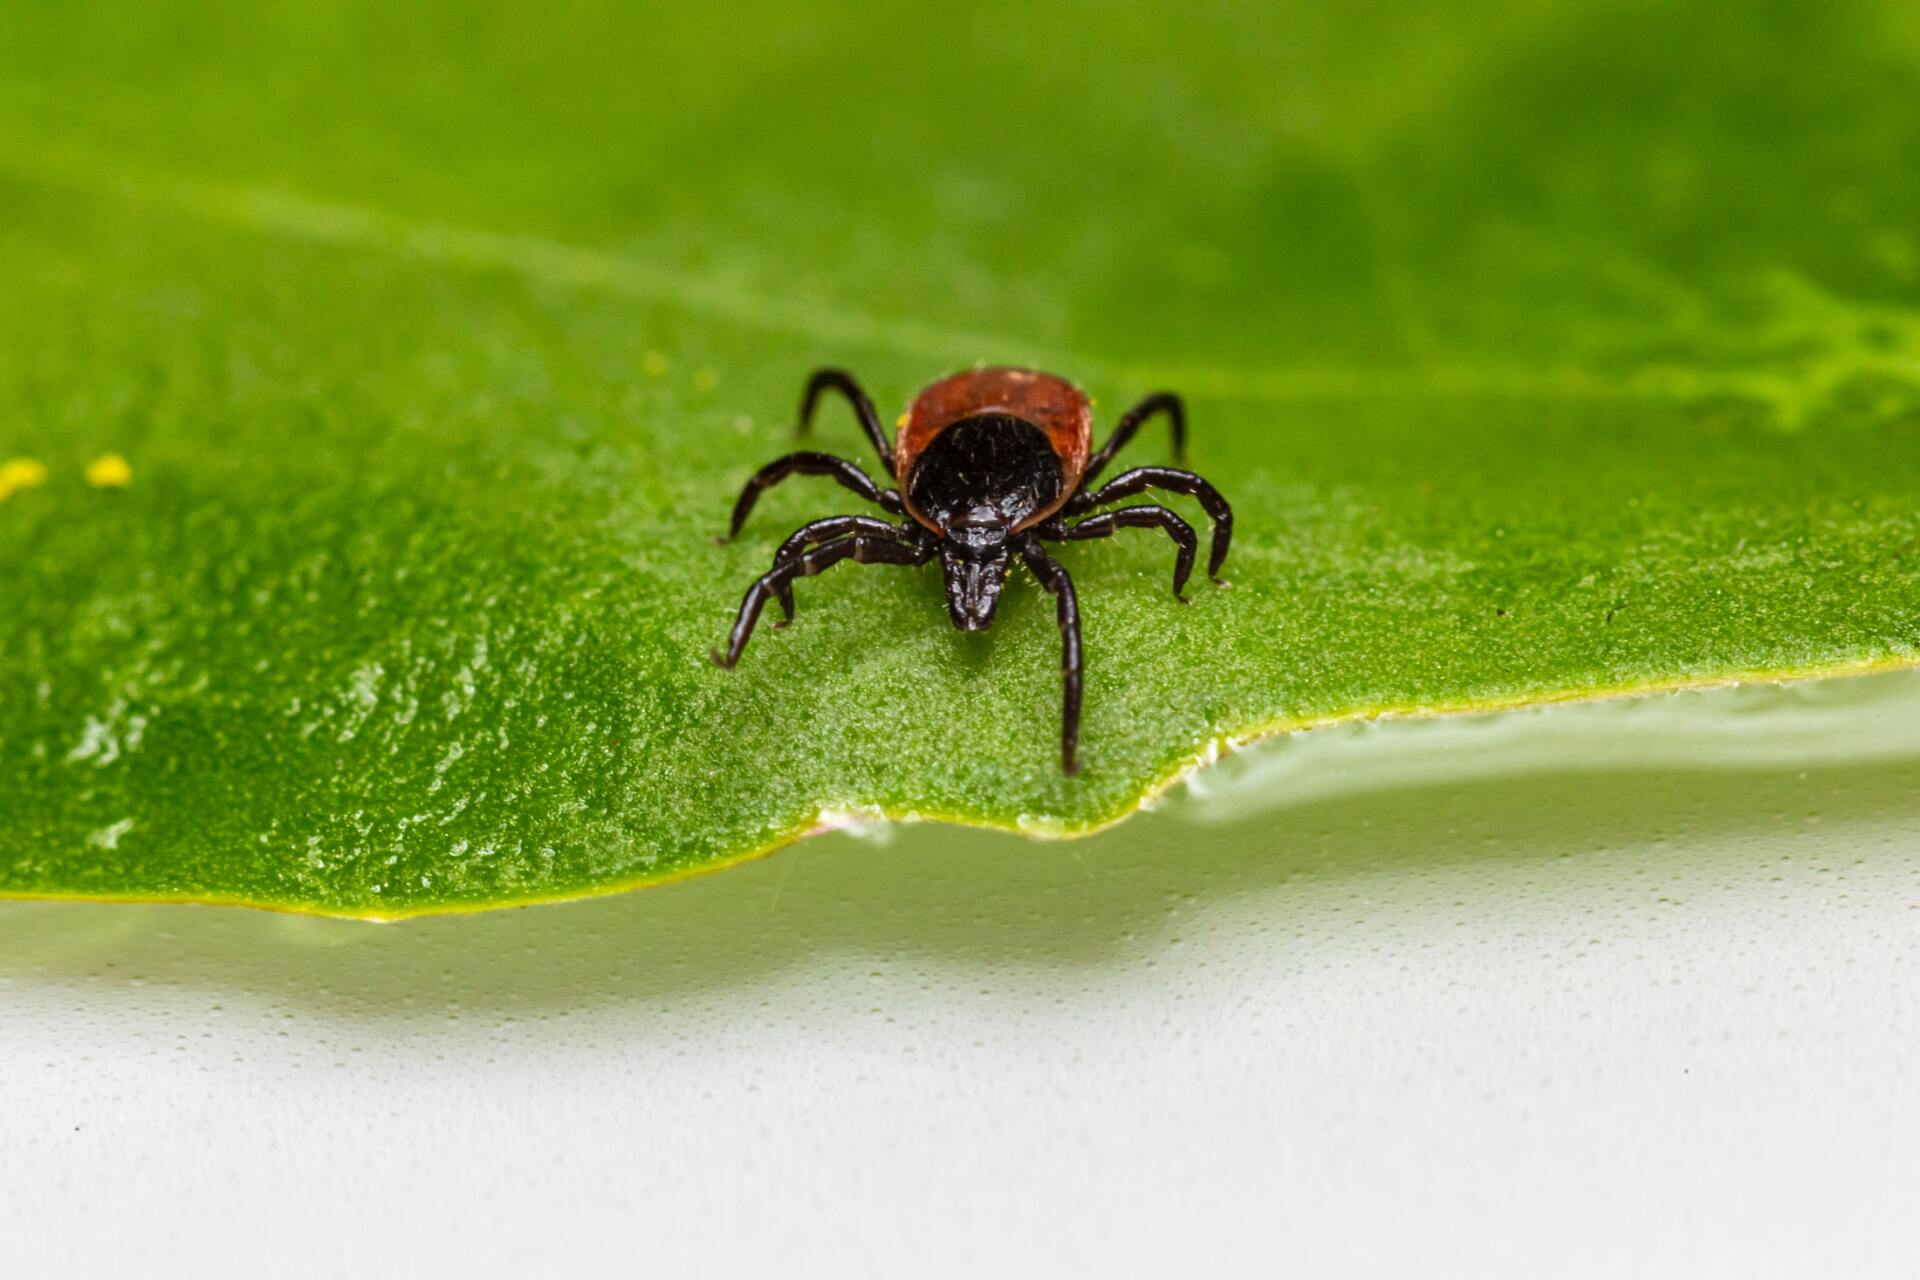 Taking a Bite Out of Lyme's Disease